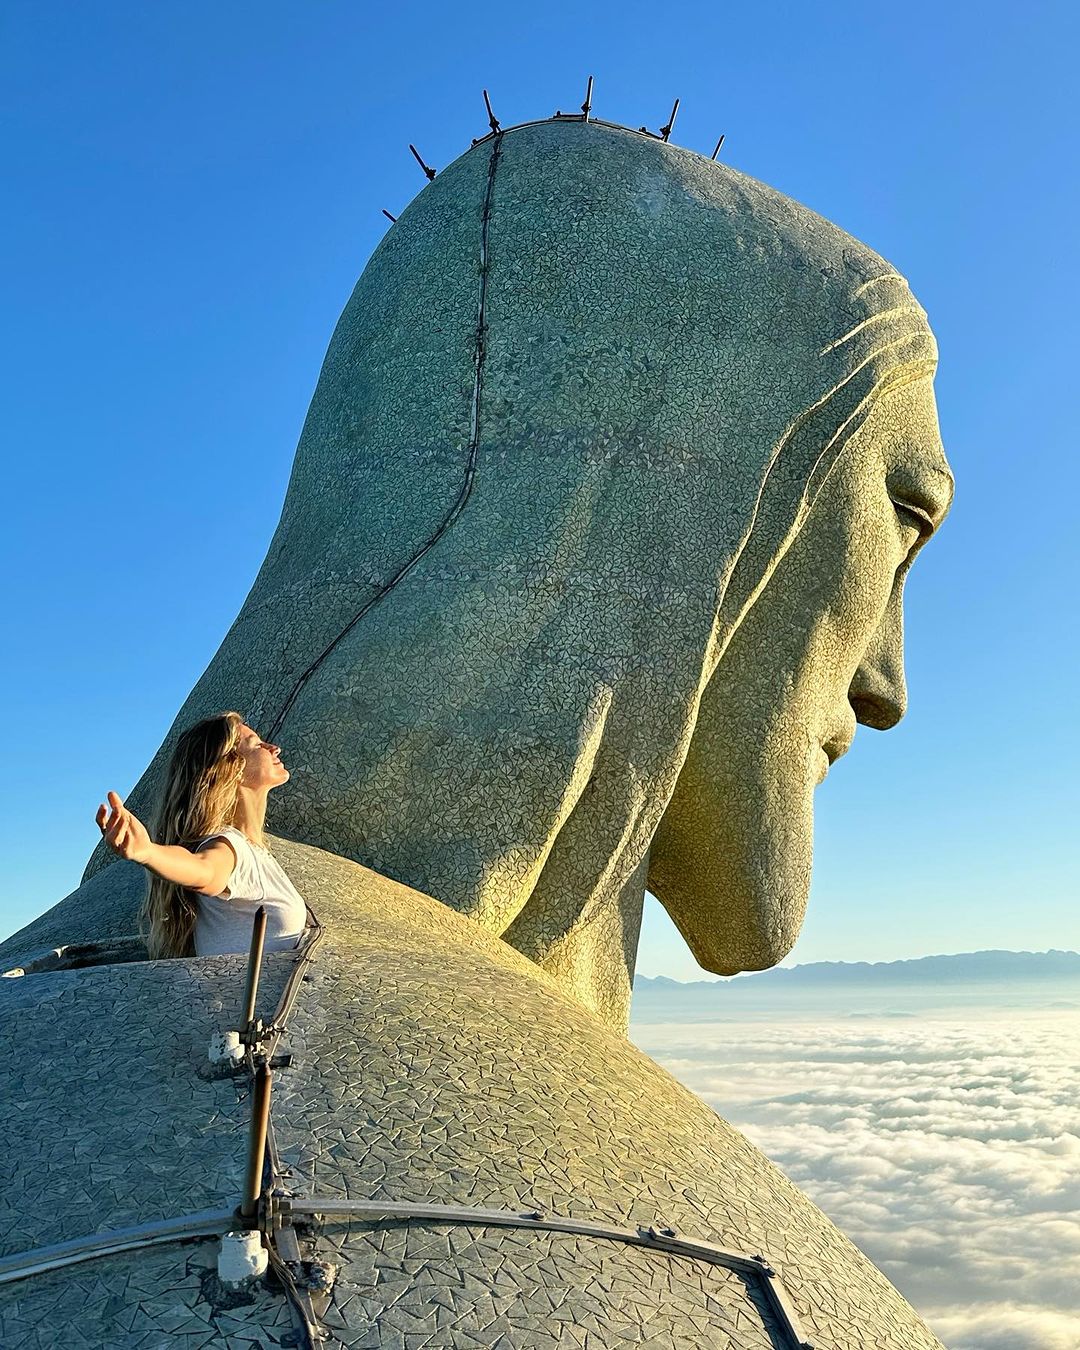 Gisele Bündchen gets the full experience of the Christ the Redeemer sculpture in Rio